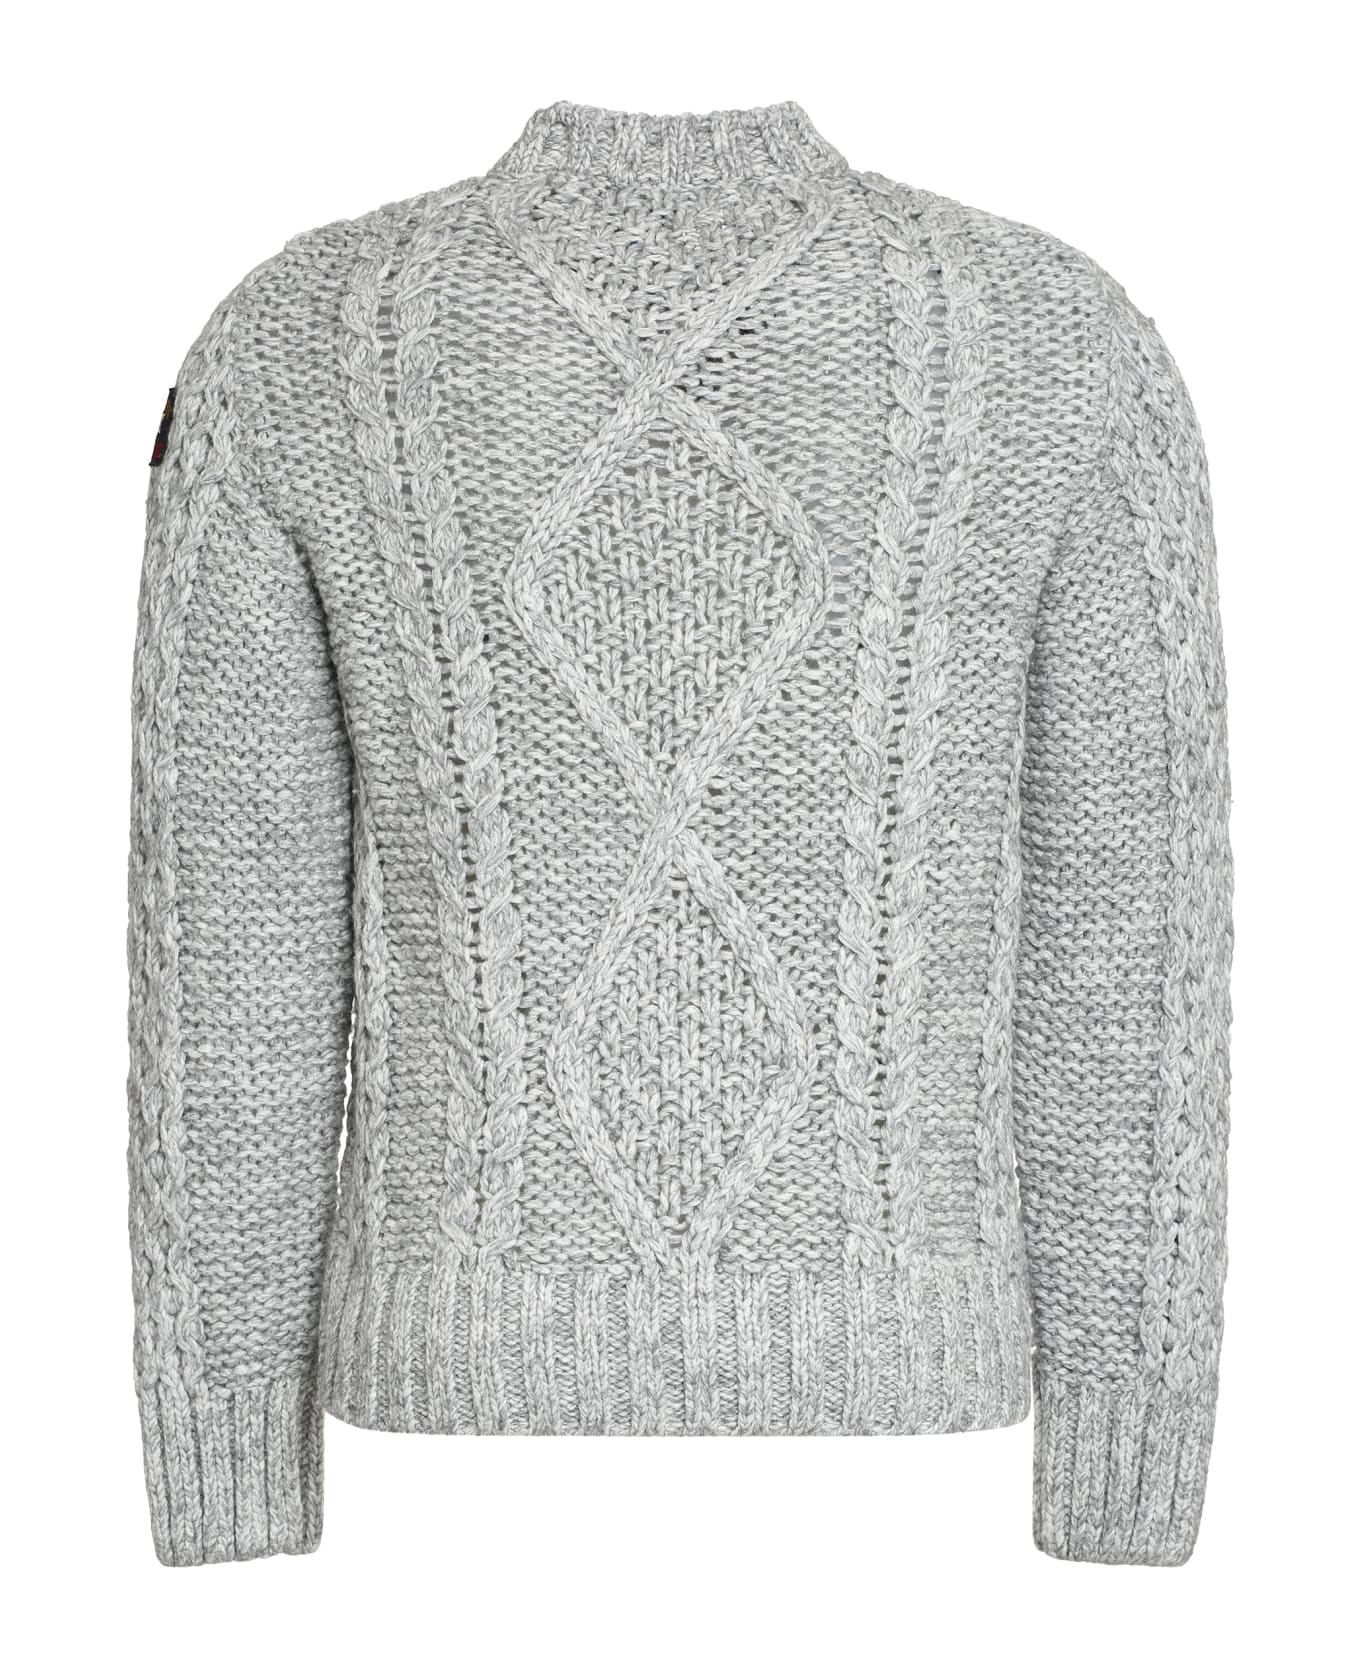 Paul&Shark Cable Knit Sweater - grey